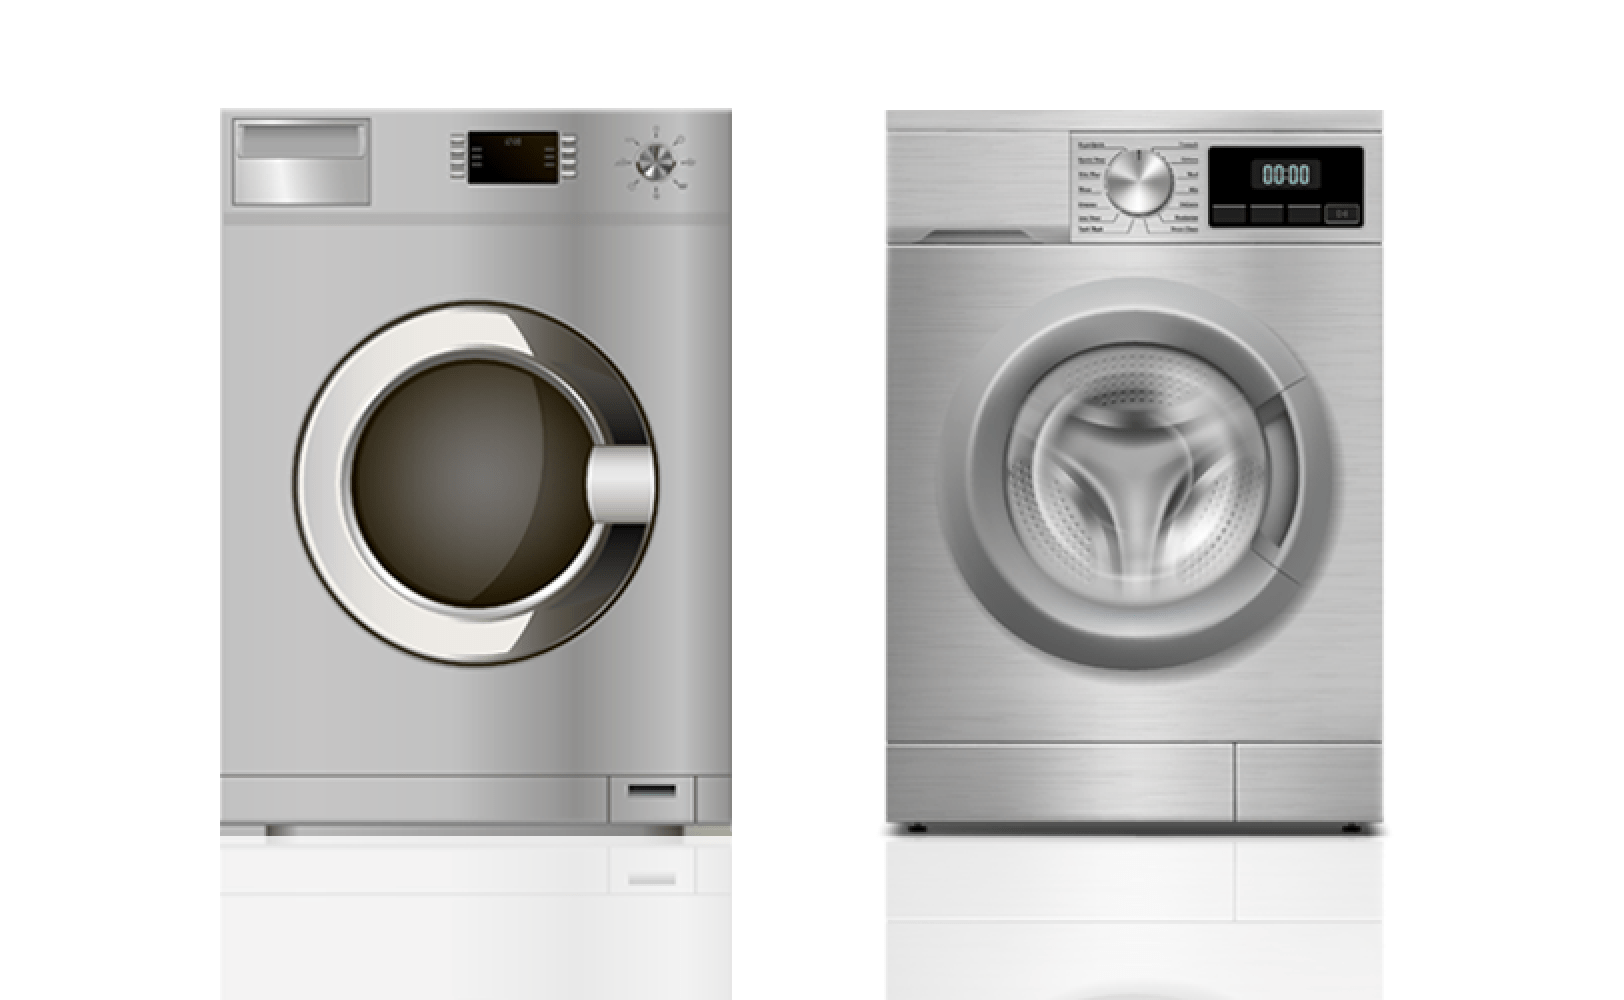 Washer Repair Service in San Francisco